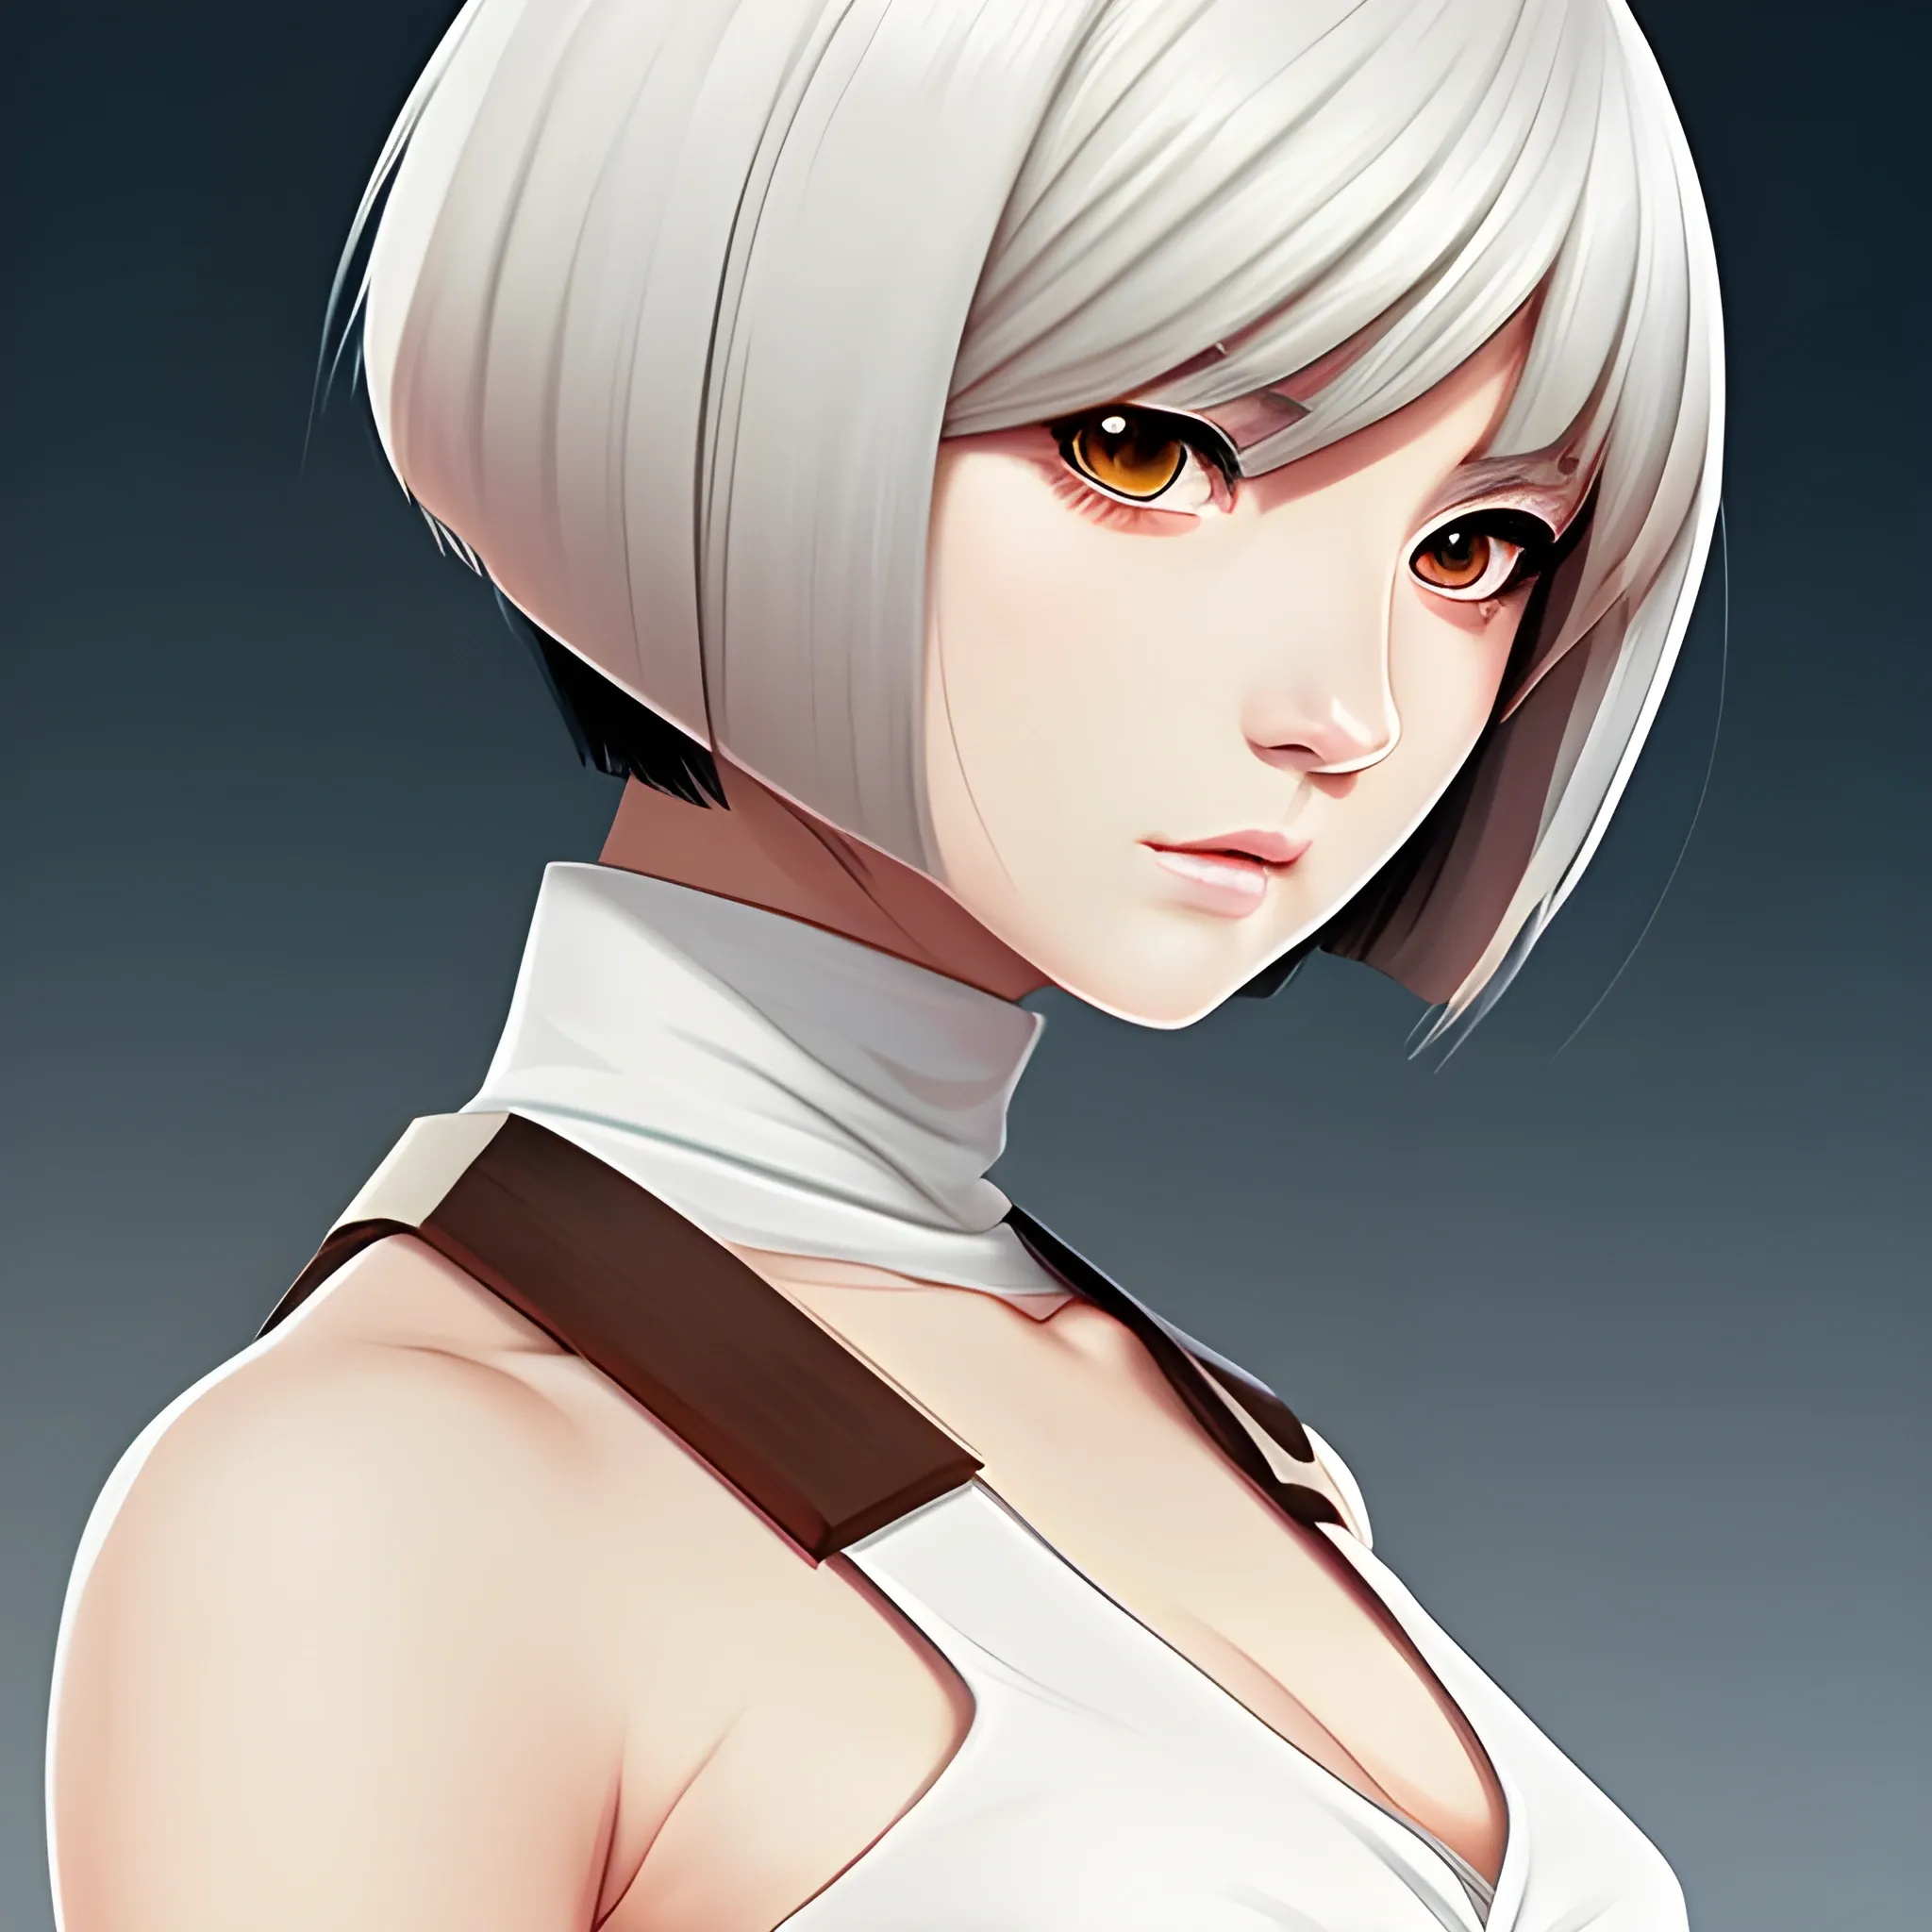 Woman, white clothes with brown borders, warrior, anime, detail, bob cut hair, half body, anime style
